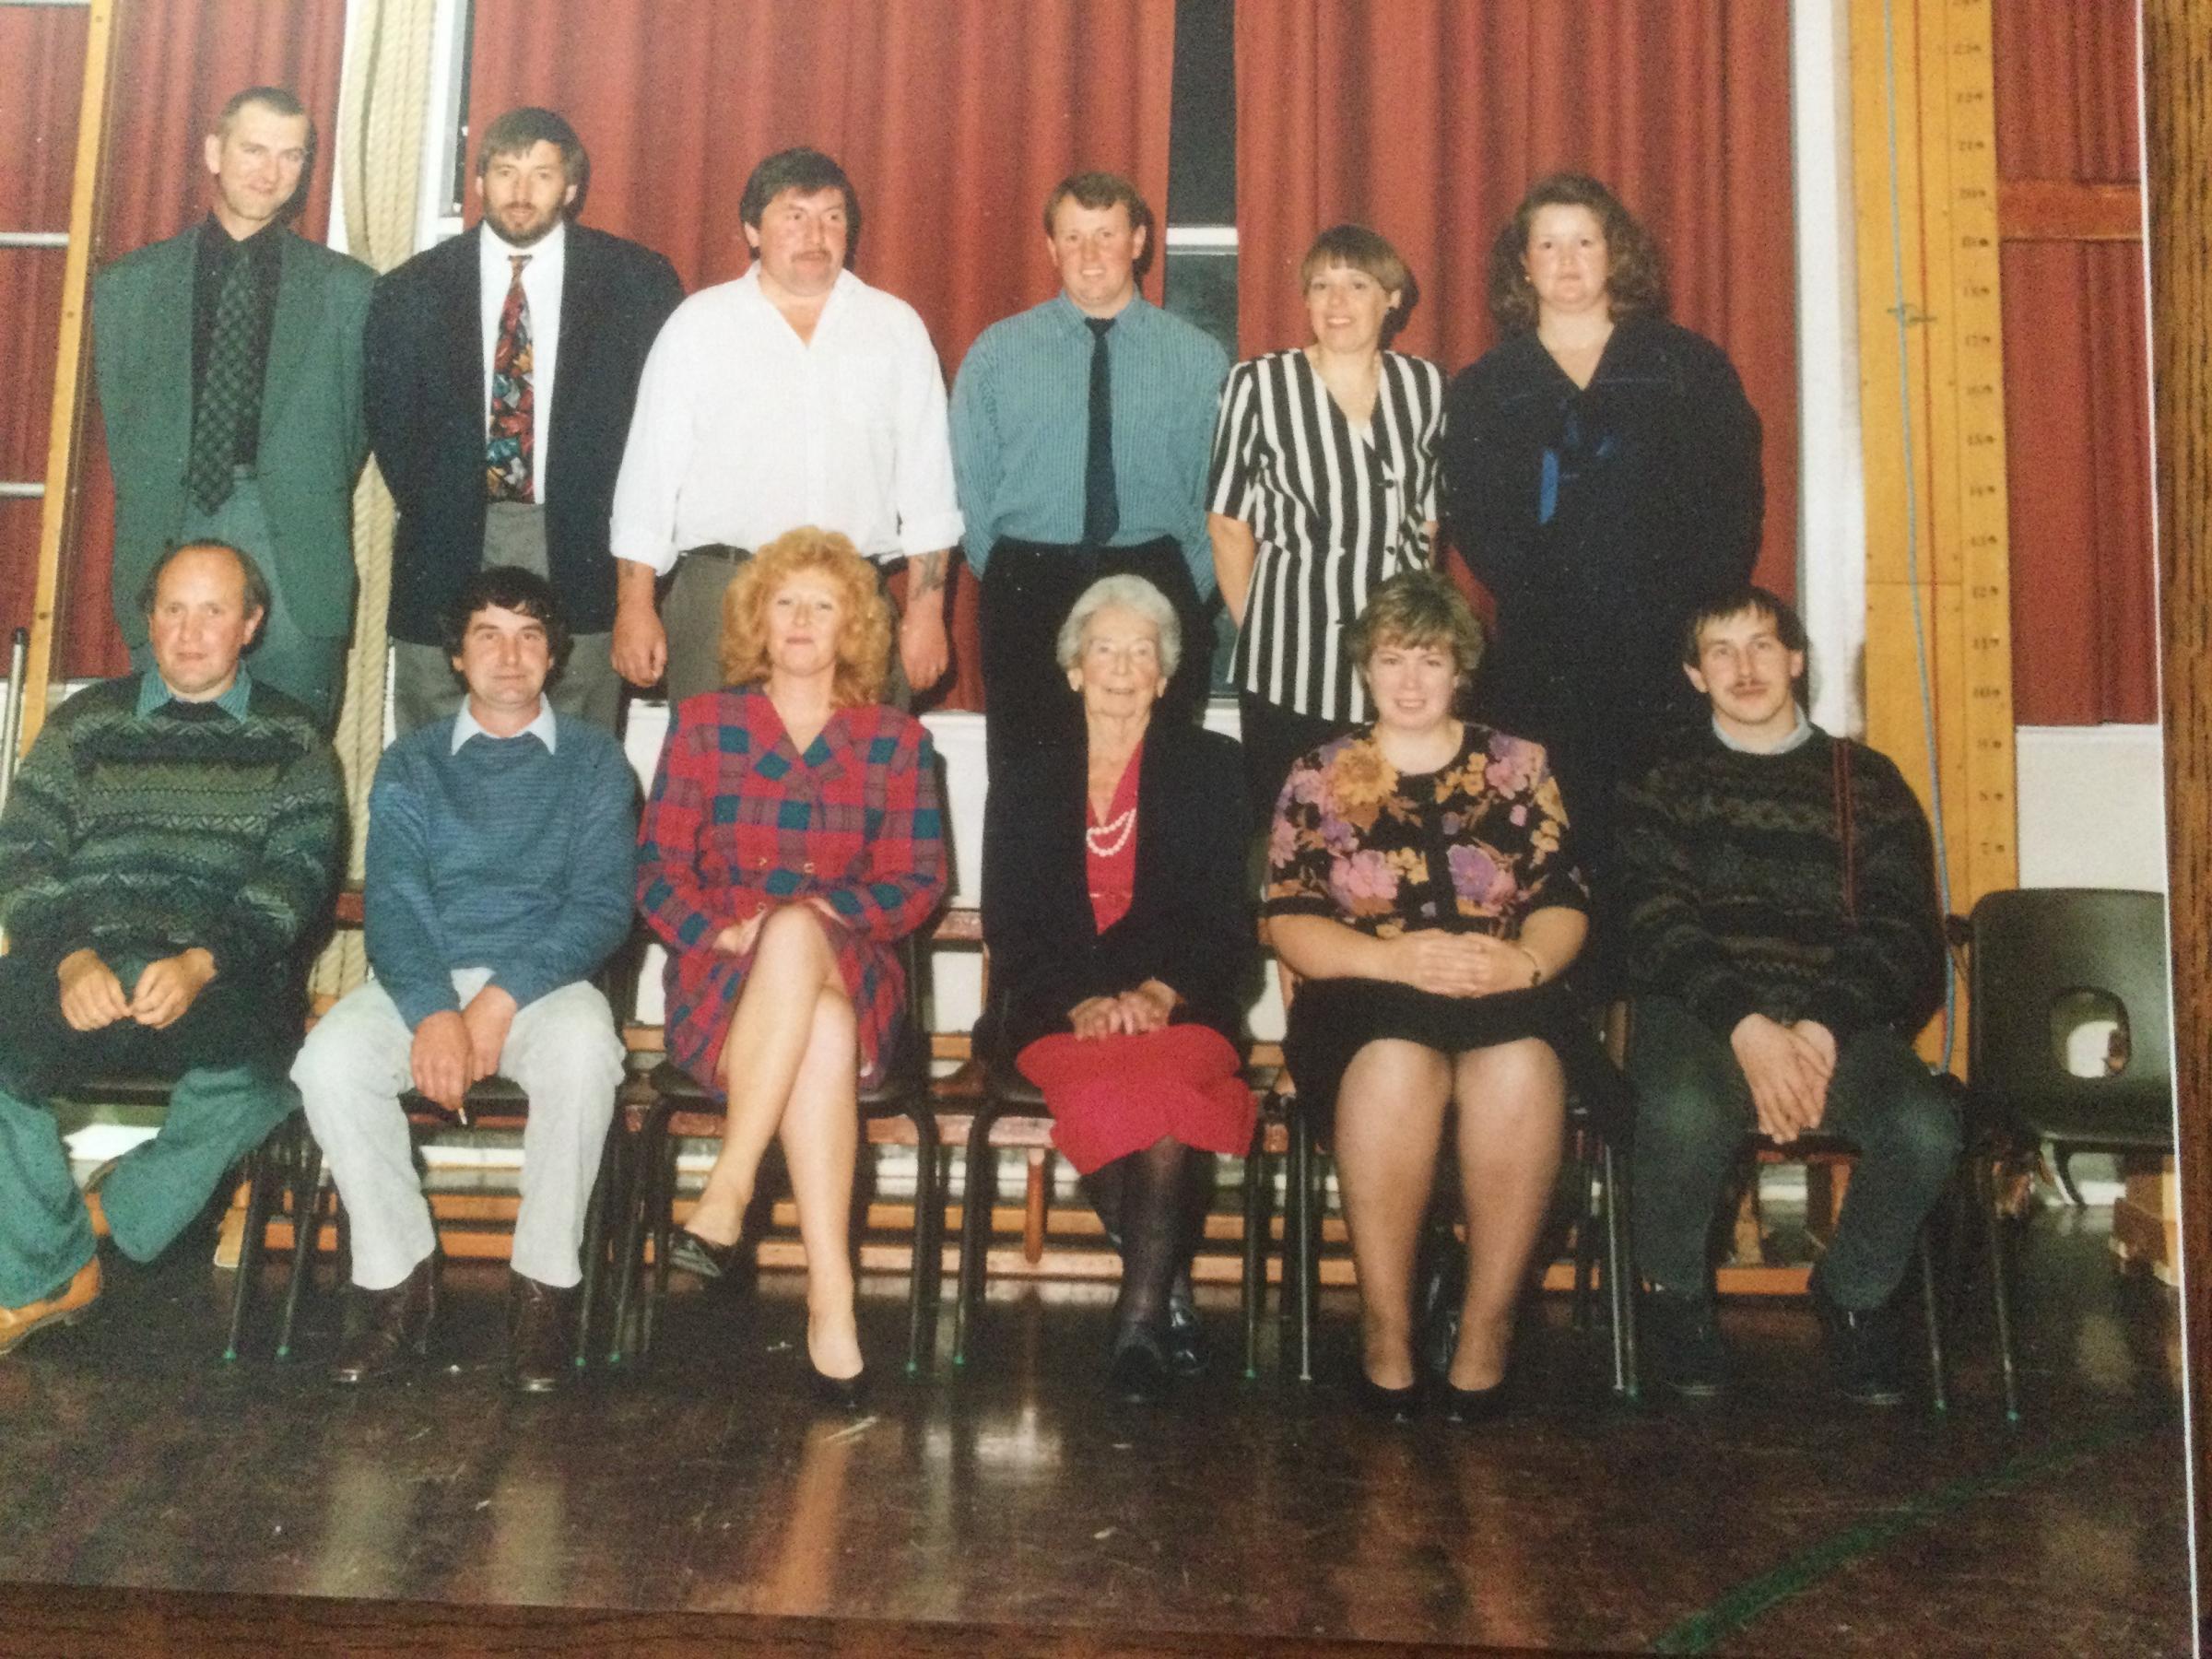 The group at a school reunion in 1993